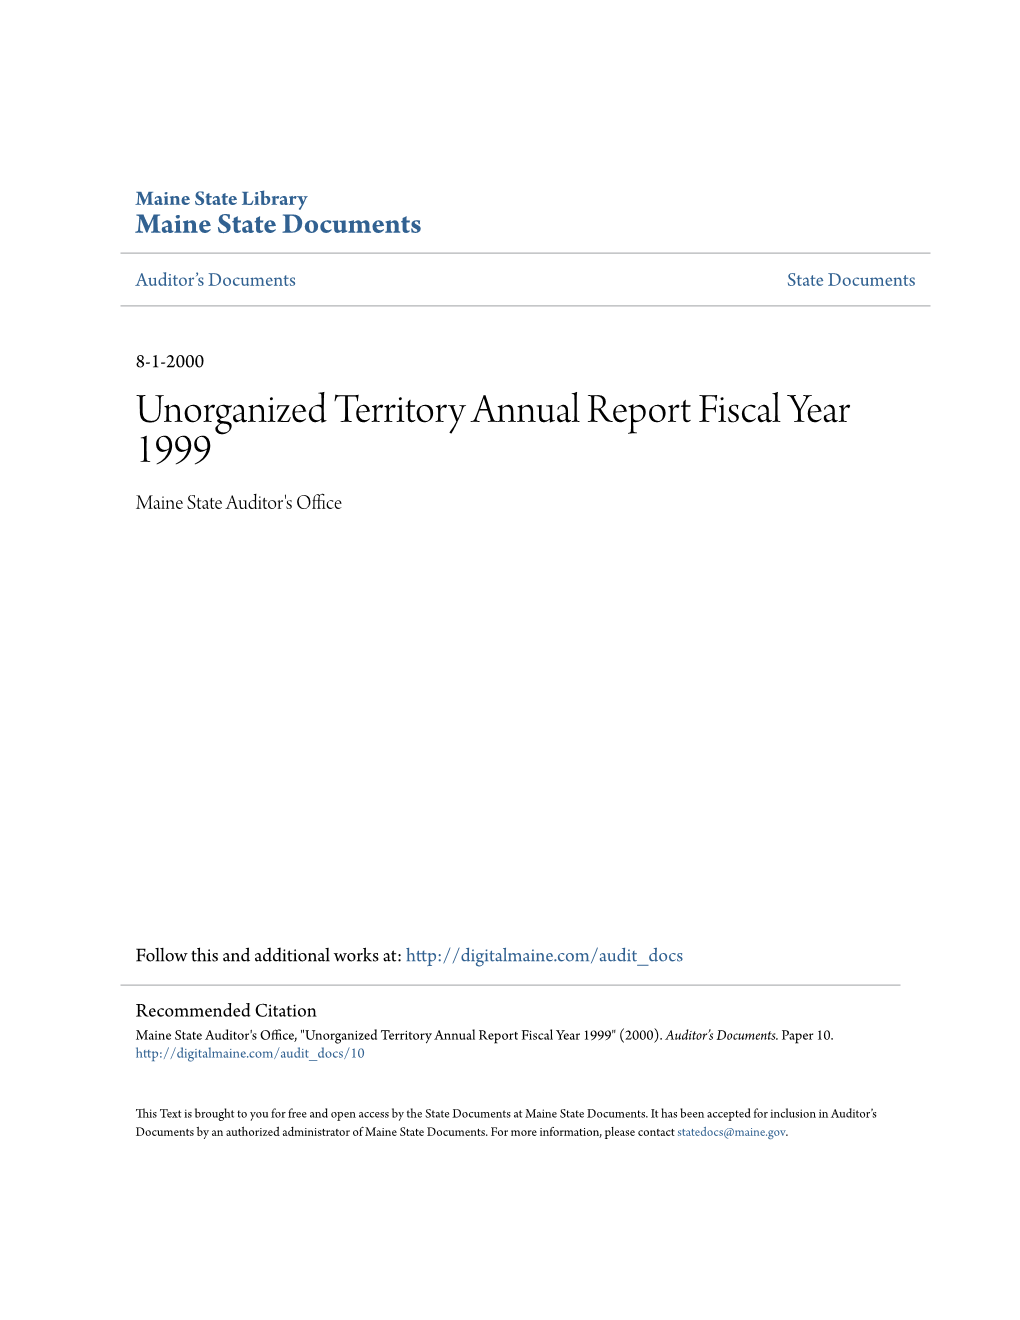 Unorganized Territory Annual Report Fiscal Year 1999 Maine State Auditor's Office